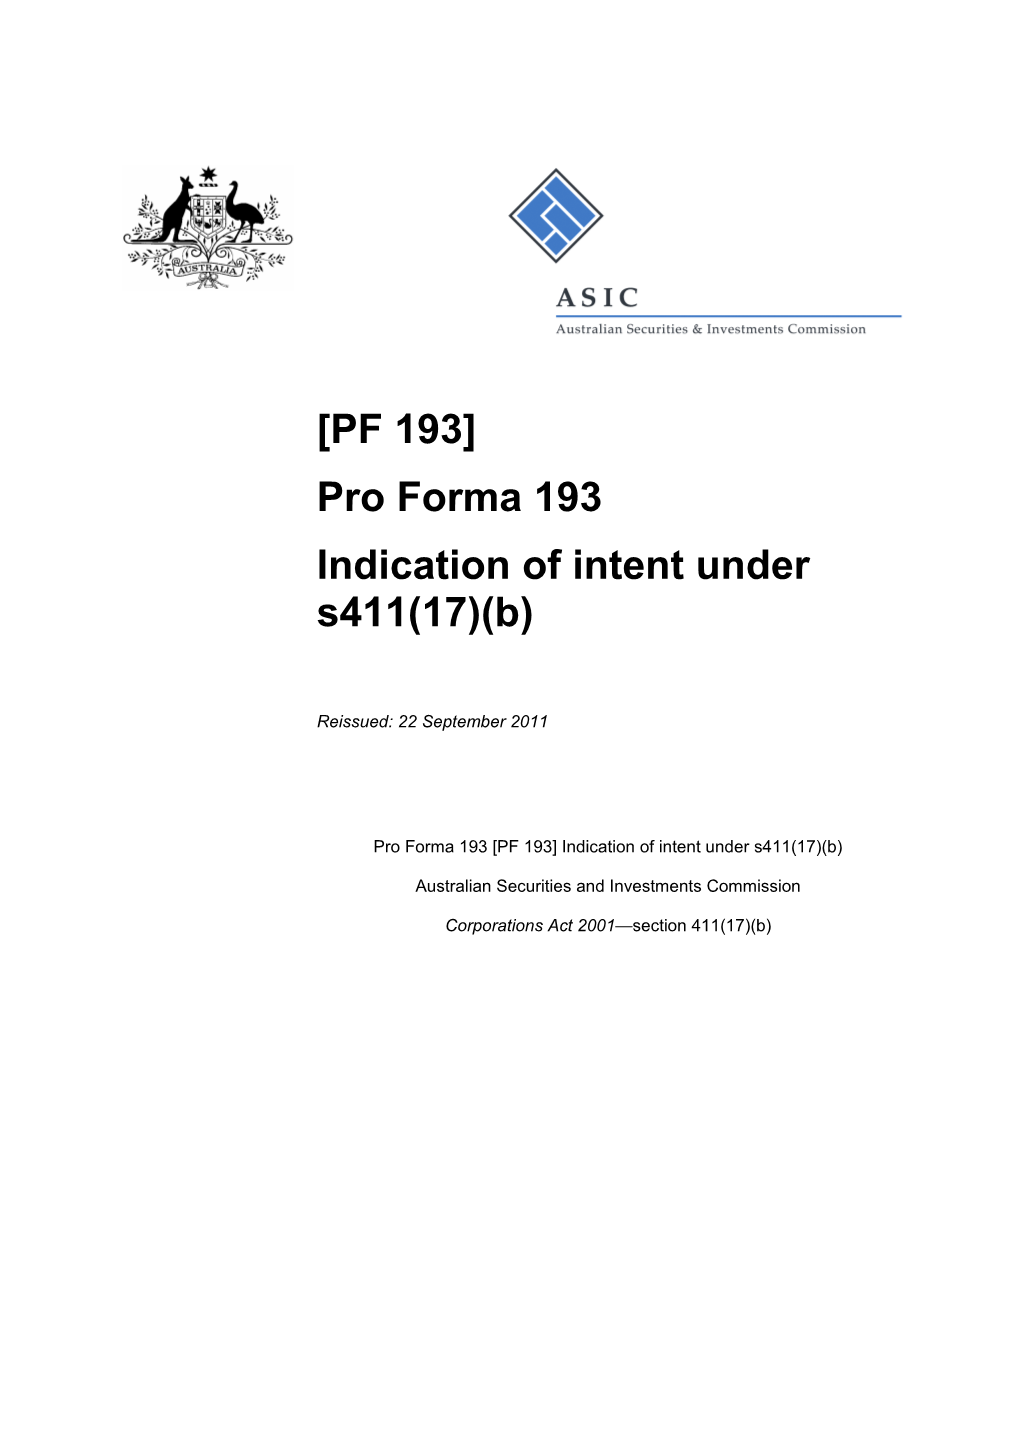 PF 193 Pro Forma 193 Indication of Intent Under S411(17)(B)